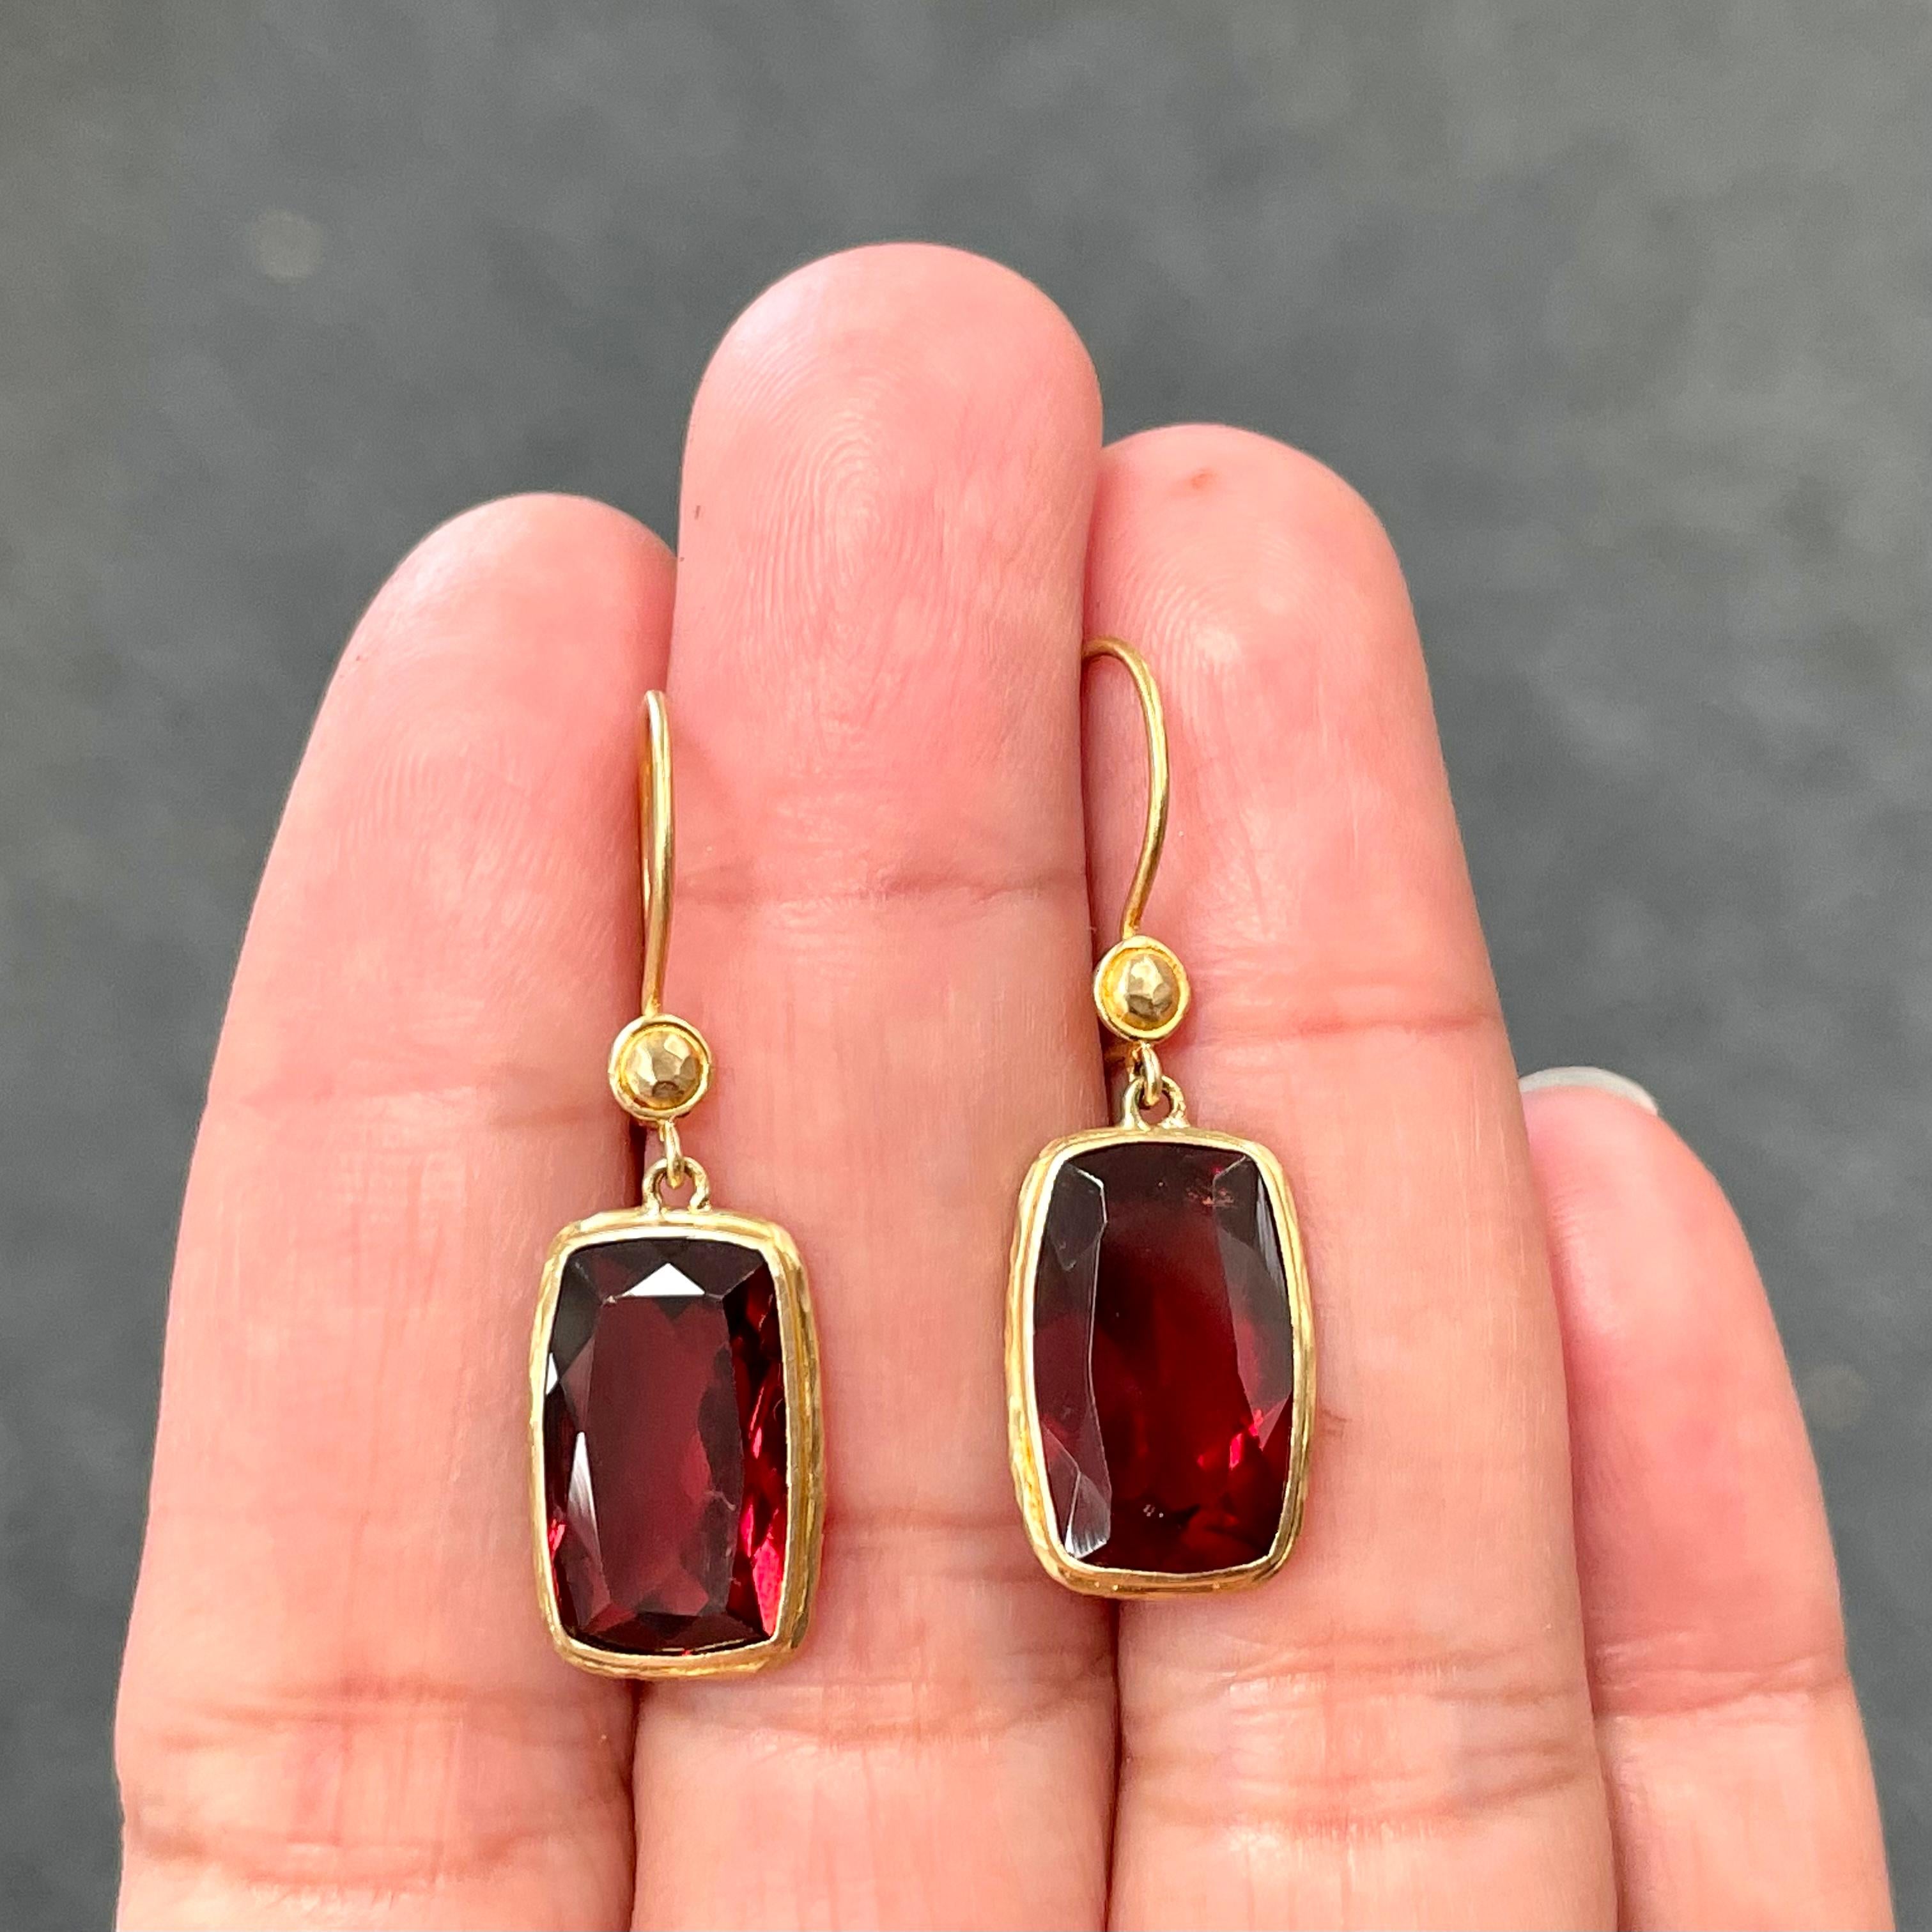 Steven Battelle Faceted Long Cushion 10.4 Carats Garnet 18K Gold Wire Earrings In New Condition For Sale In Soquel, CA